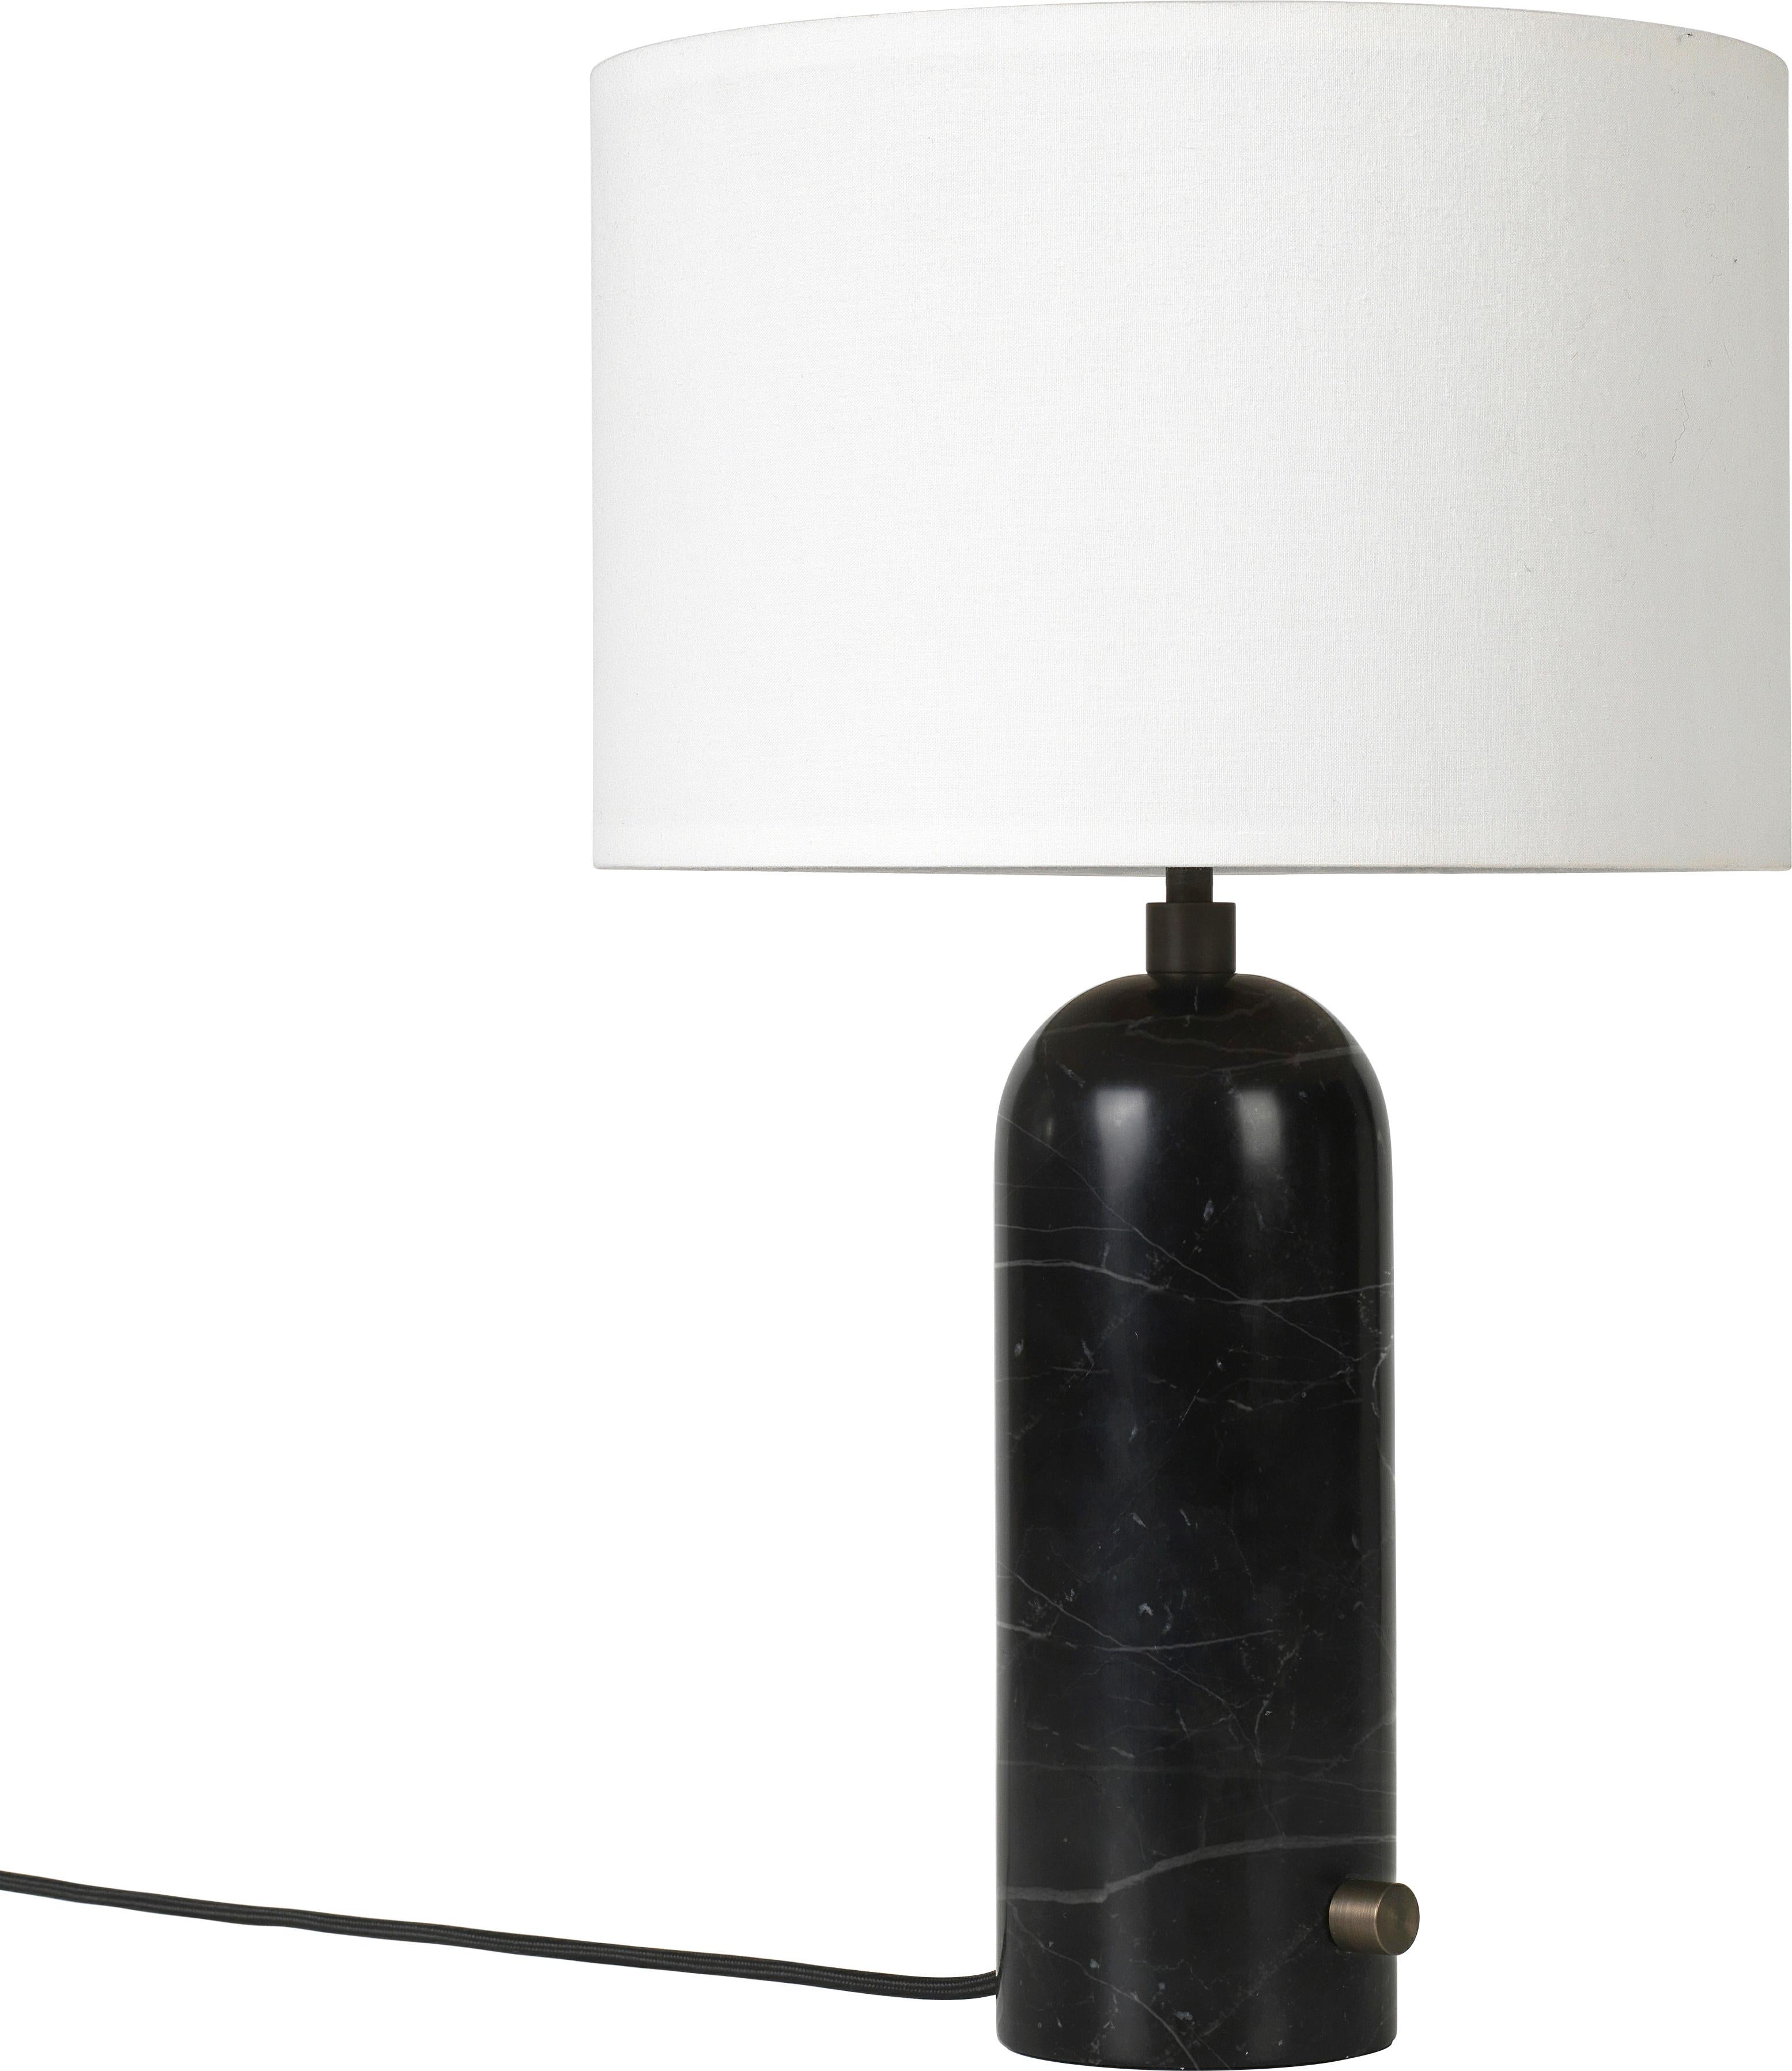 Large 'Gravity' marble table lamp by Space Copenhagen for Gubi in black.

Executed in solid marble with a canvas or white textile shade perched atop its stem, the Gravity table lamp designed by Space Copenhagen for GUBI contrasts strength and